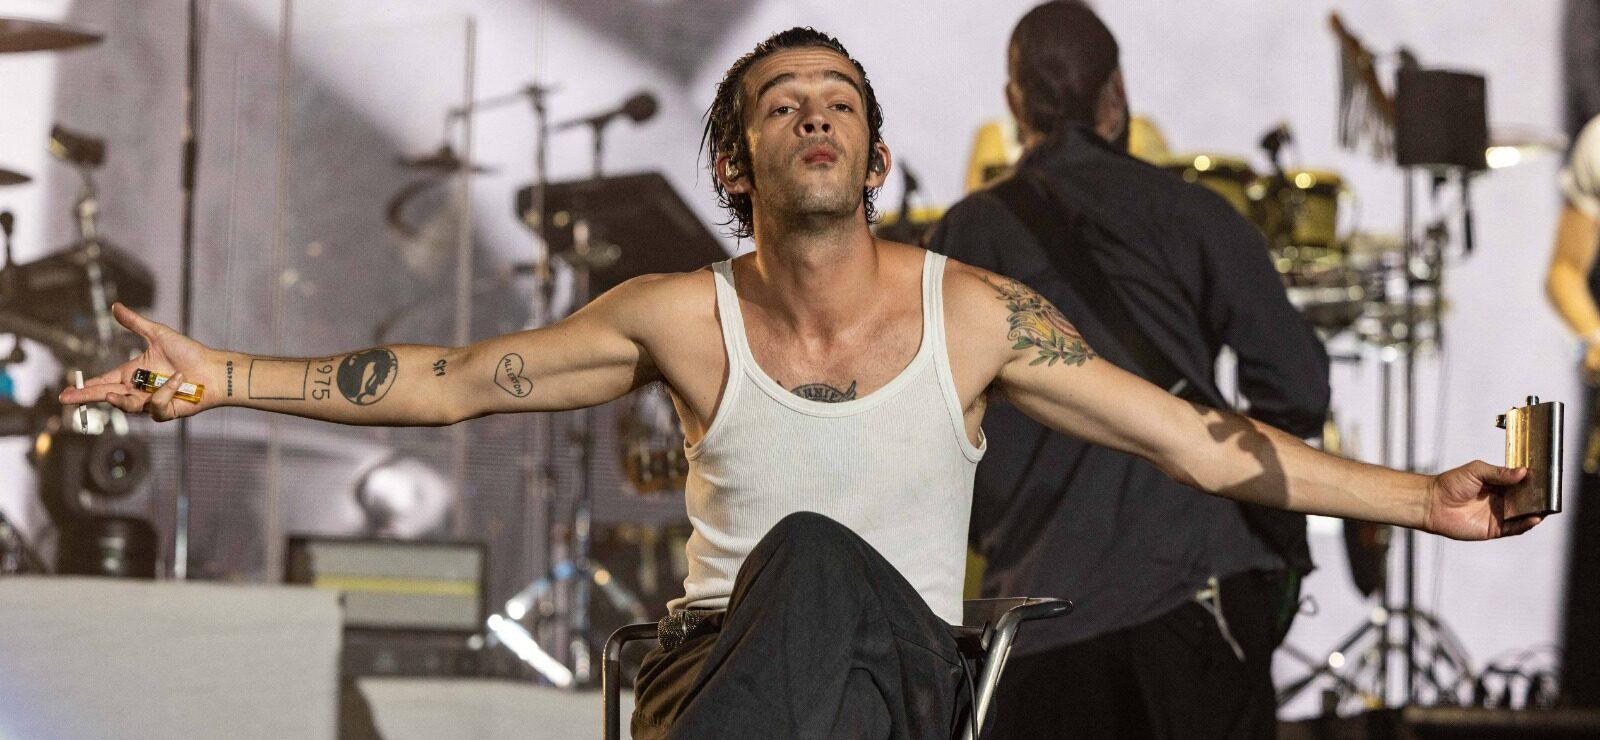 Matty Healy’s Anti-LGBT Law Protest In Malaysia Might Cost The 1975 $2.7 Million